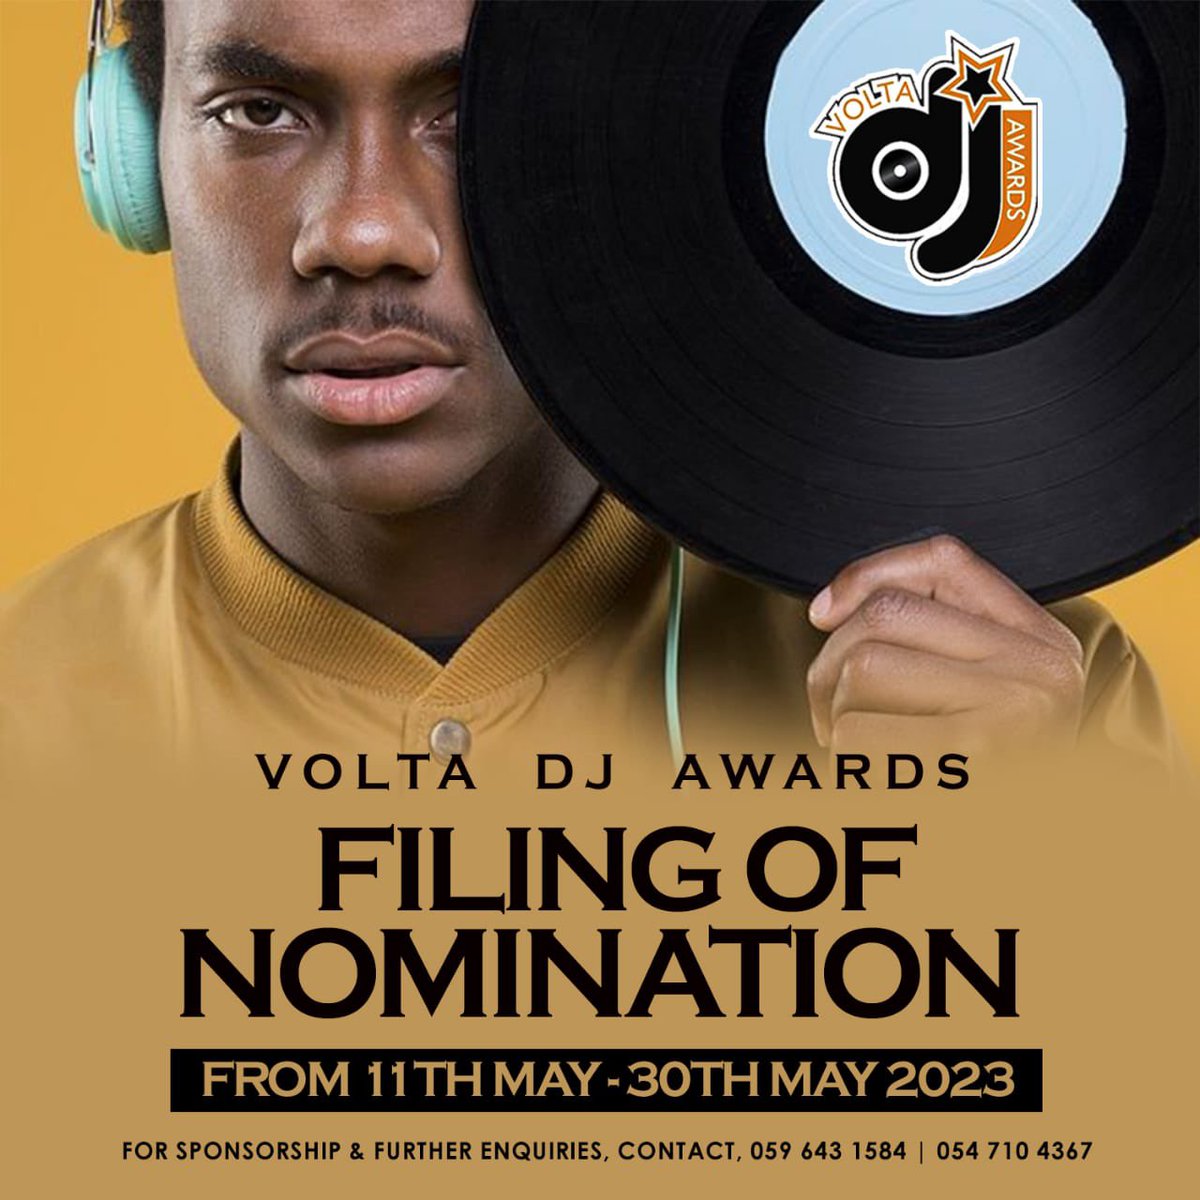 Nominations for the 3rd special anniversary edition of Volta's biggest DJ awards festival open for 2023. Visit our website voltadjawards.com or contact us via our socials to file for nomination. 

#vdja23 #letthemusicplay #3rdedition